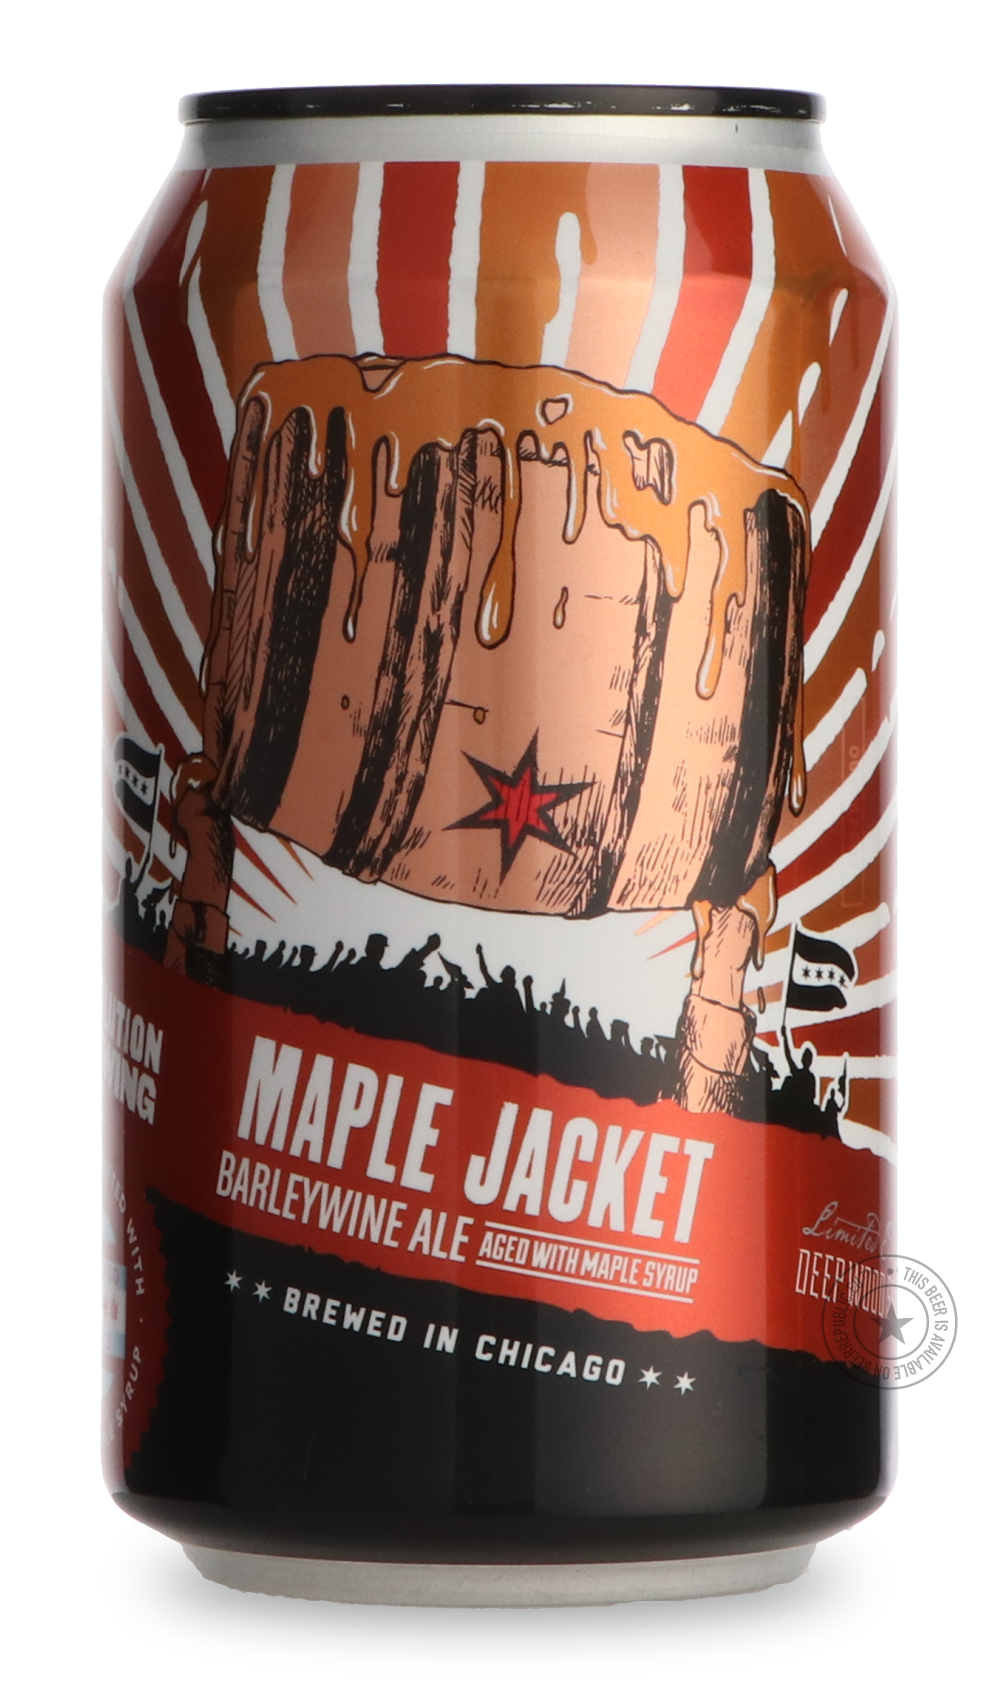 -Revolution- Maple Jacket-Brown & Dark- Only @ Beer Republic - The best online beer store for American & Canadian craft beer - Buy beer online from the USA and Canada - Bier online kopen - Amerikaans bier kopen - Craft beer store - Craft beer kopen - Amerikanisch bier kaufen - Bier online kaufen - Acheter biere online - IPA - Stout - Porter - New England IPA - Hazy IPA - Imperial Stout - Barrel Aged - Barrel Aged Imperial Stout - Brown - Dark beer - Blond - Blonde - Pilsner - Lager - Wheat - Weizen - Amber 